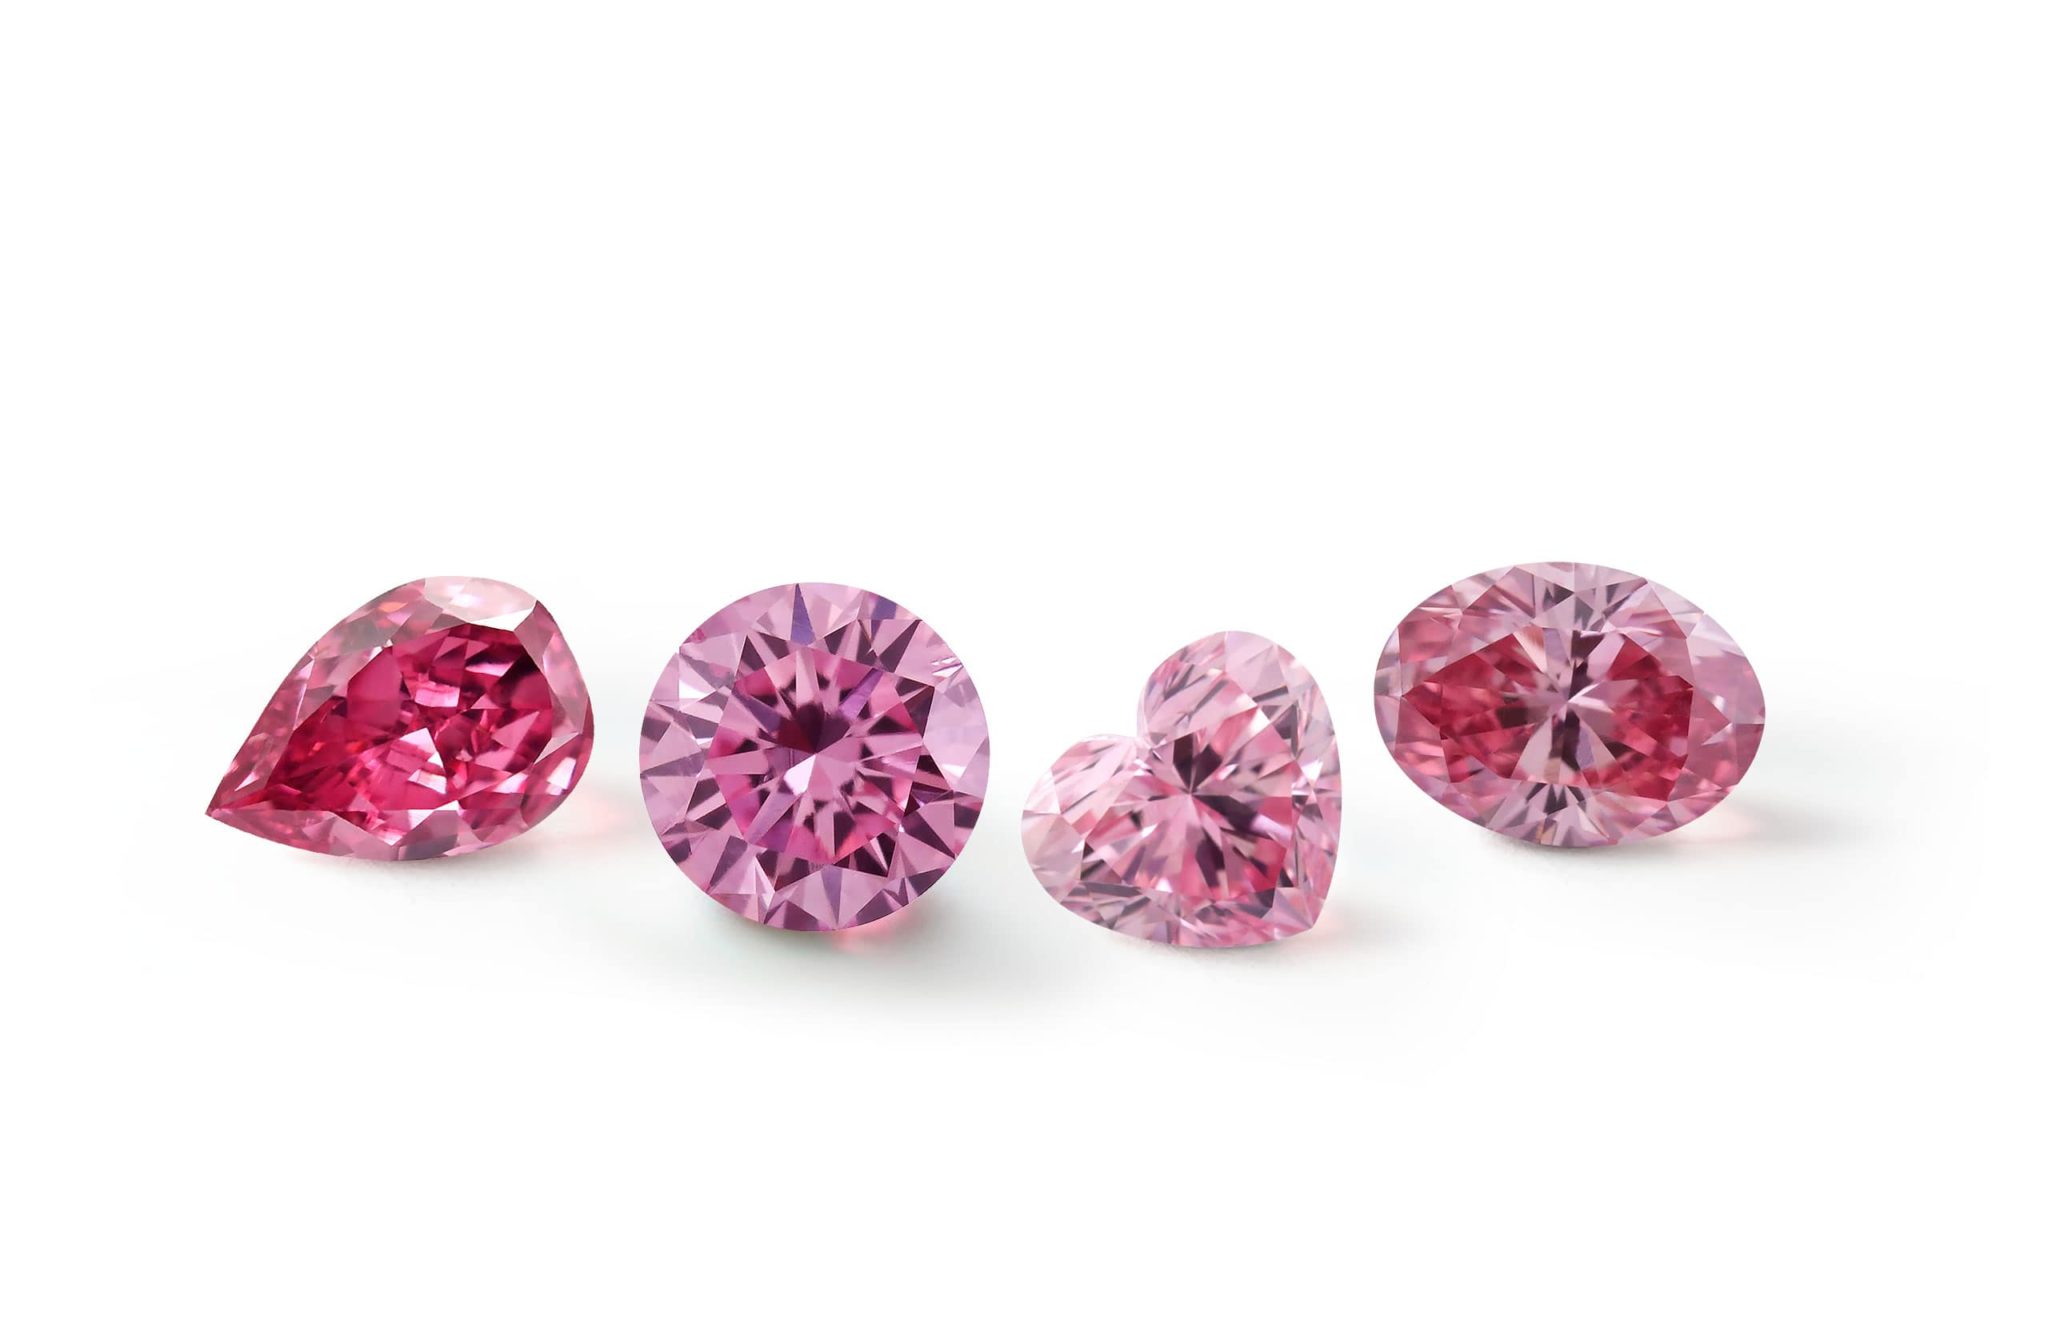 Increase In Investment Of Pink Diamonds And Its Analysis